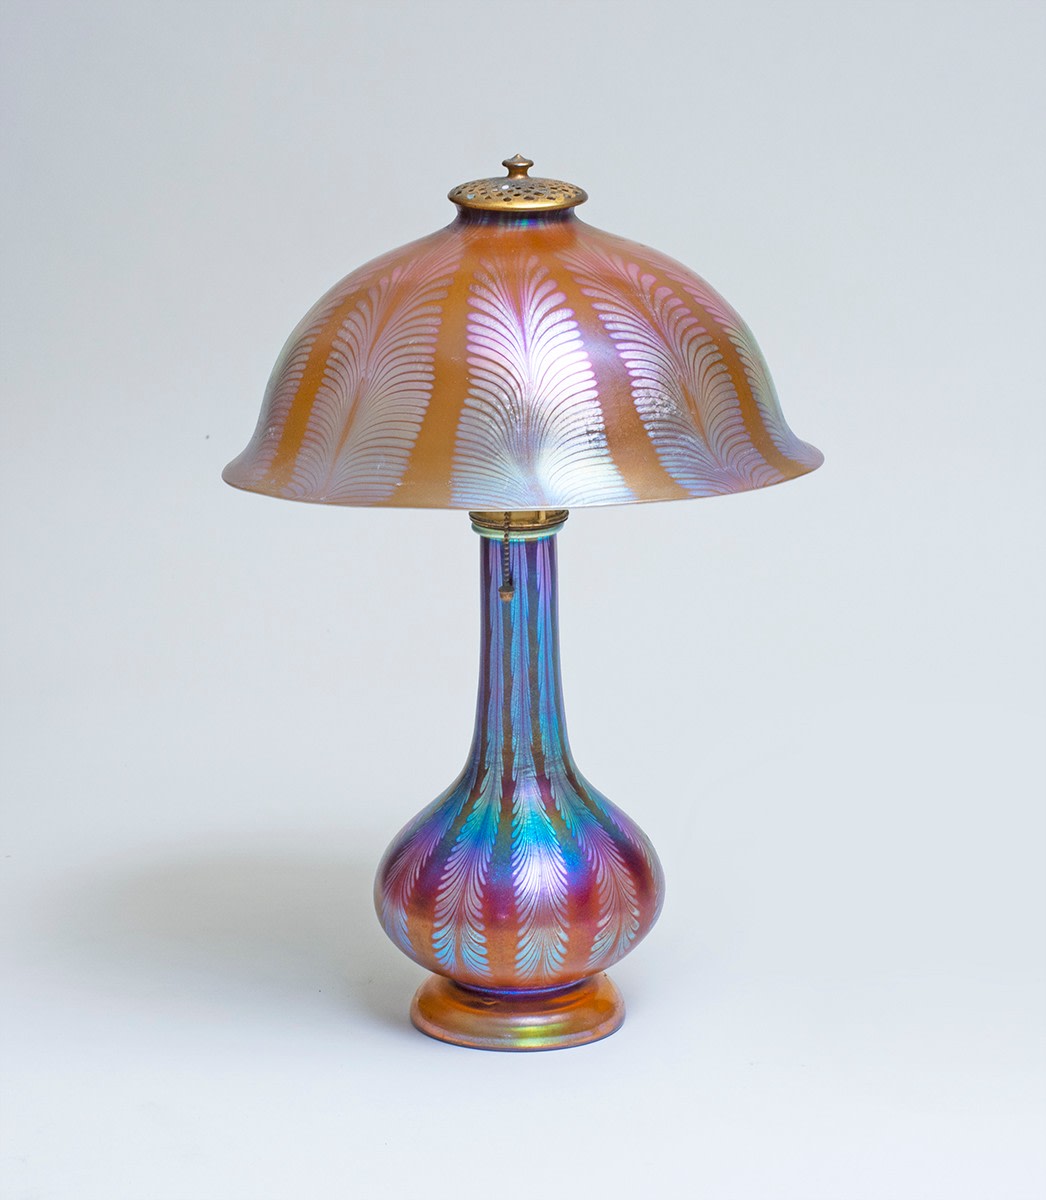 a blown favrile glass lamp by tiffany studios, iridescent rainbow glass with silvery feather stripes